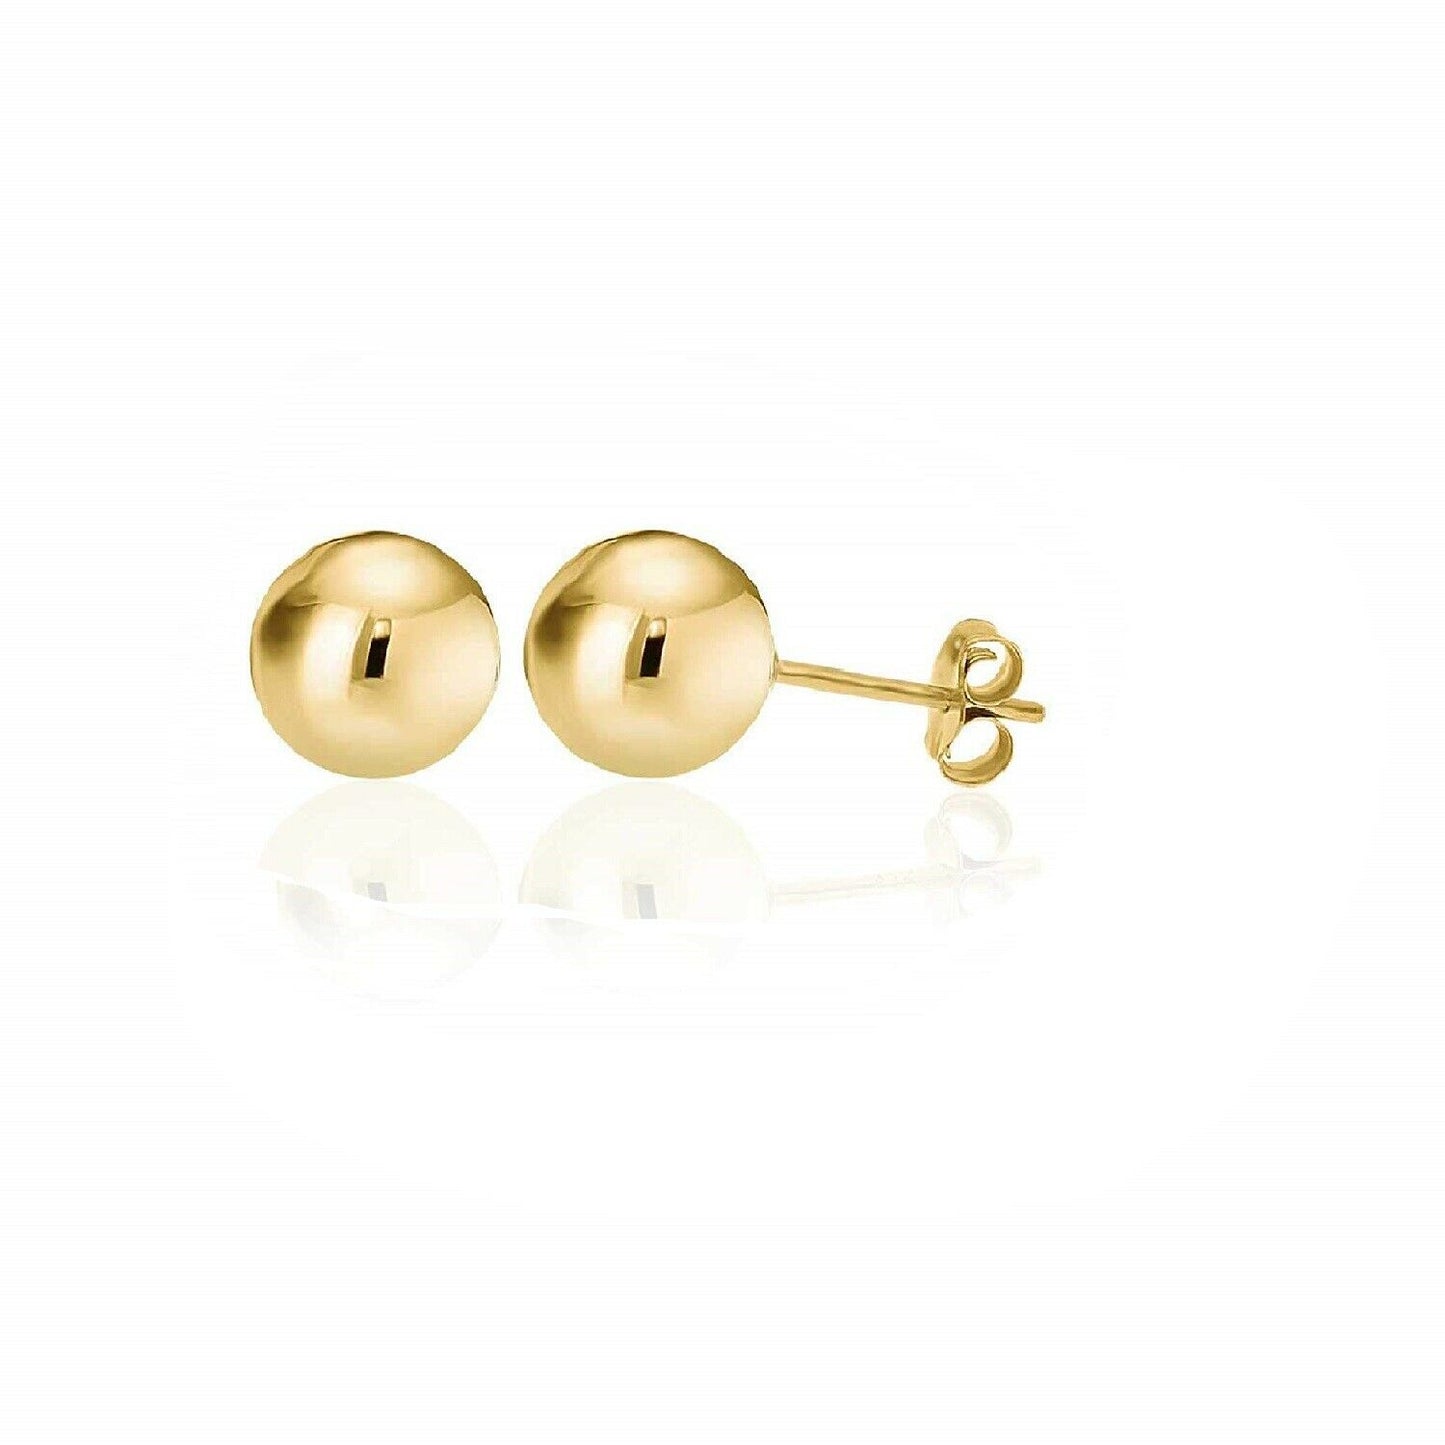 14k Solid Yellow Gold Hollow Ball Stud Earrings- Sold as a Pair 20ga